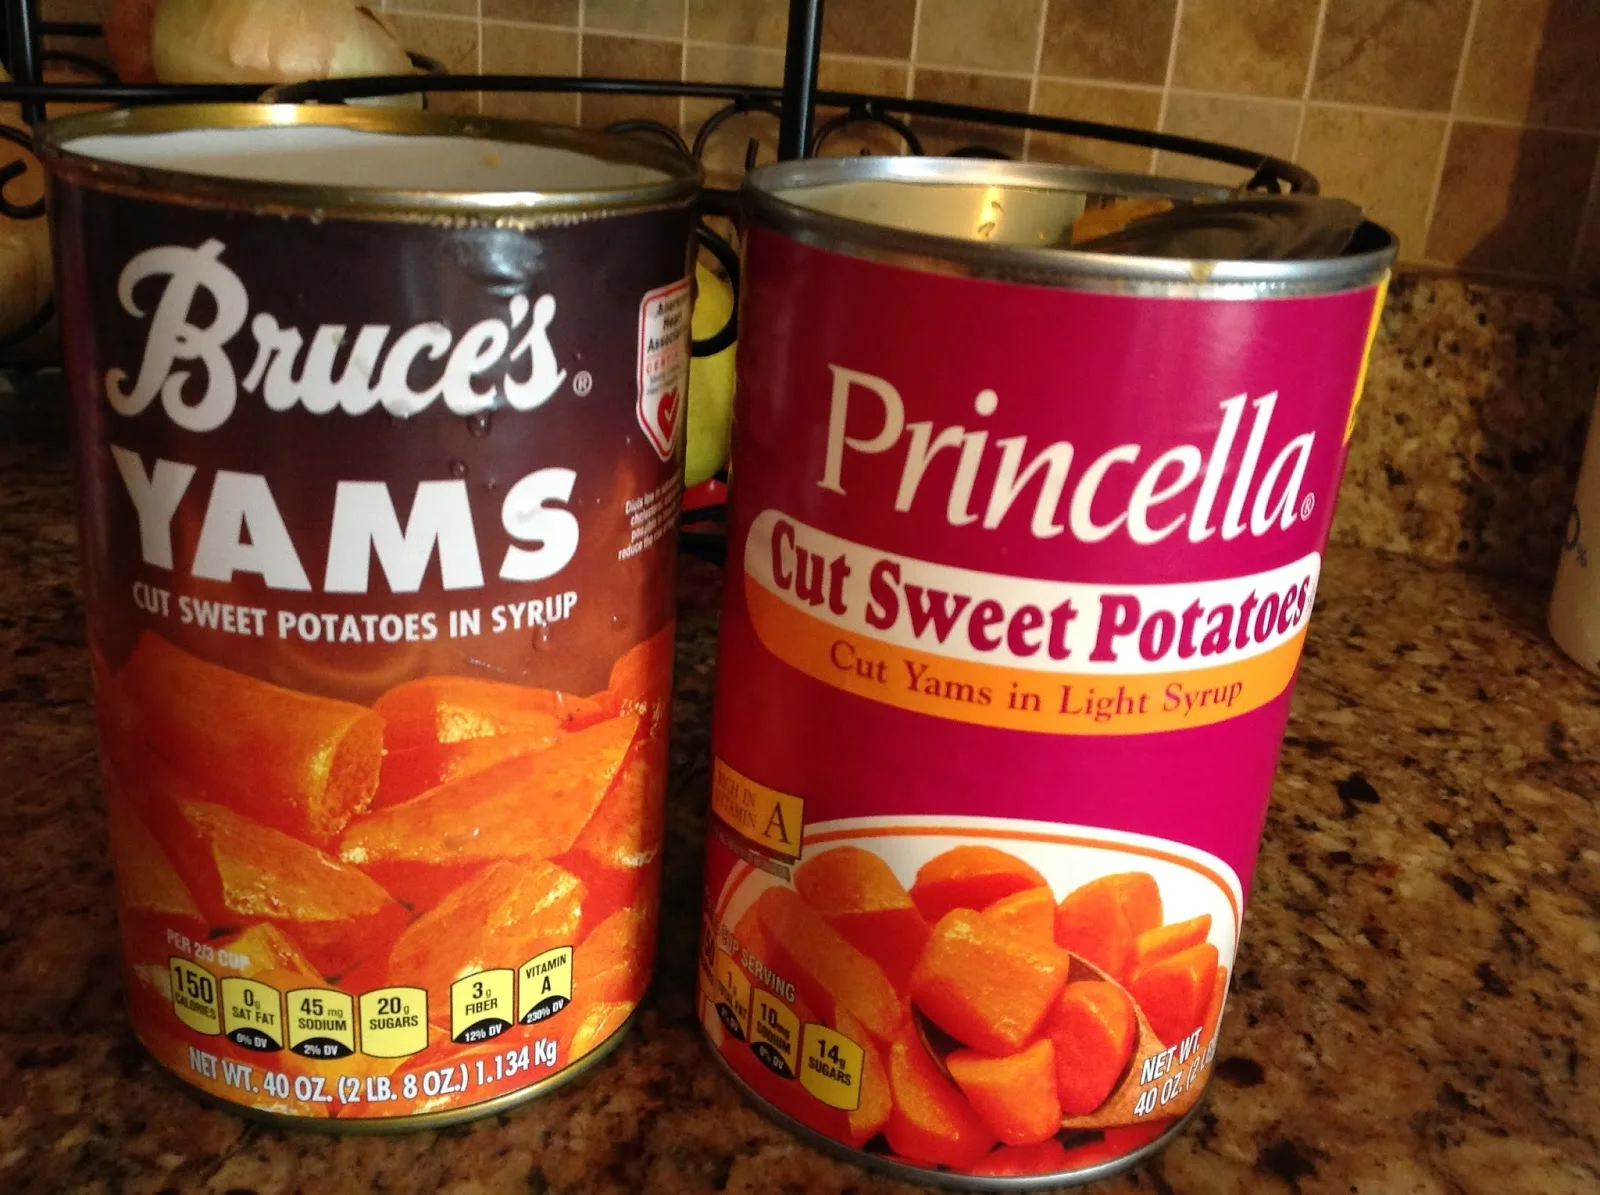 Two cans, one that says Bruce's yams with cut sweet potatoes in syrup in smaller print and the other says Princella cut sweet potatoes with cut yams in light syrup in smaller print.